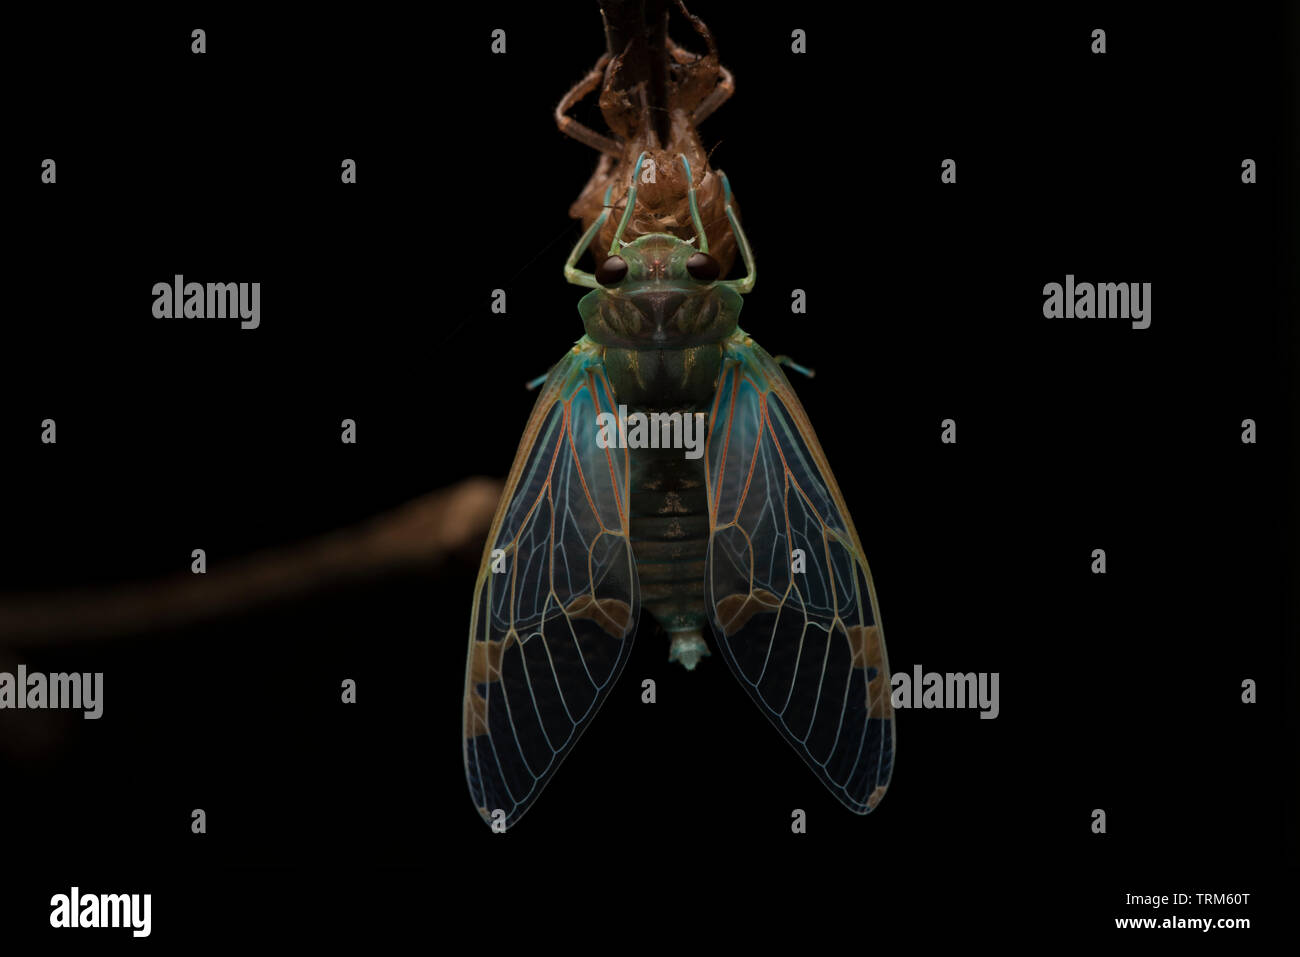 A cicada sheds its old exoskeleton and emerges as a winged adult. Stock Photo